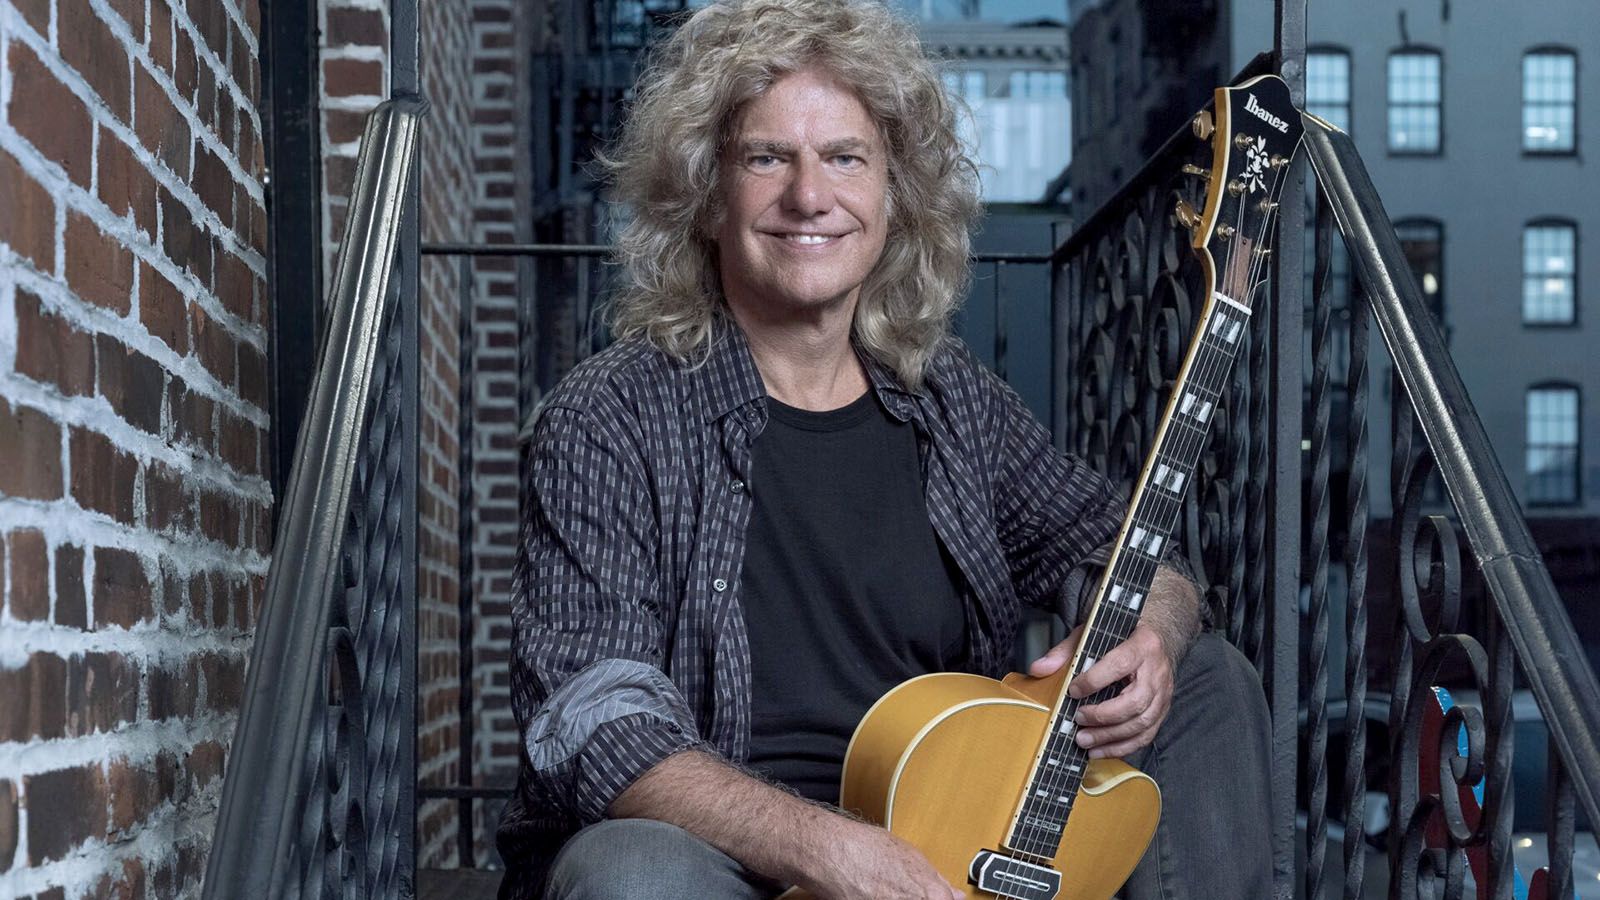 Pat Metheny will perform at The Clyde Theatre on Oct. 8.